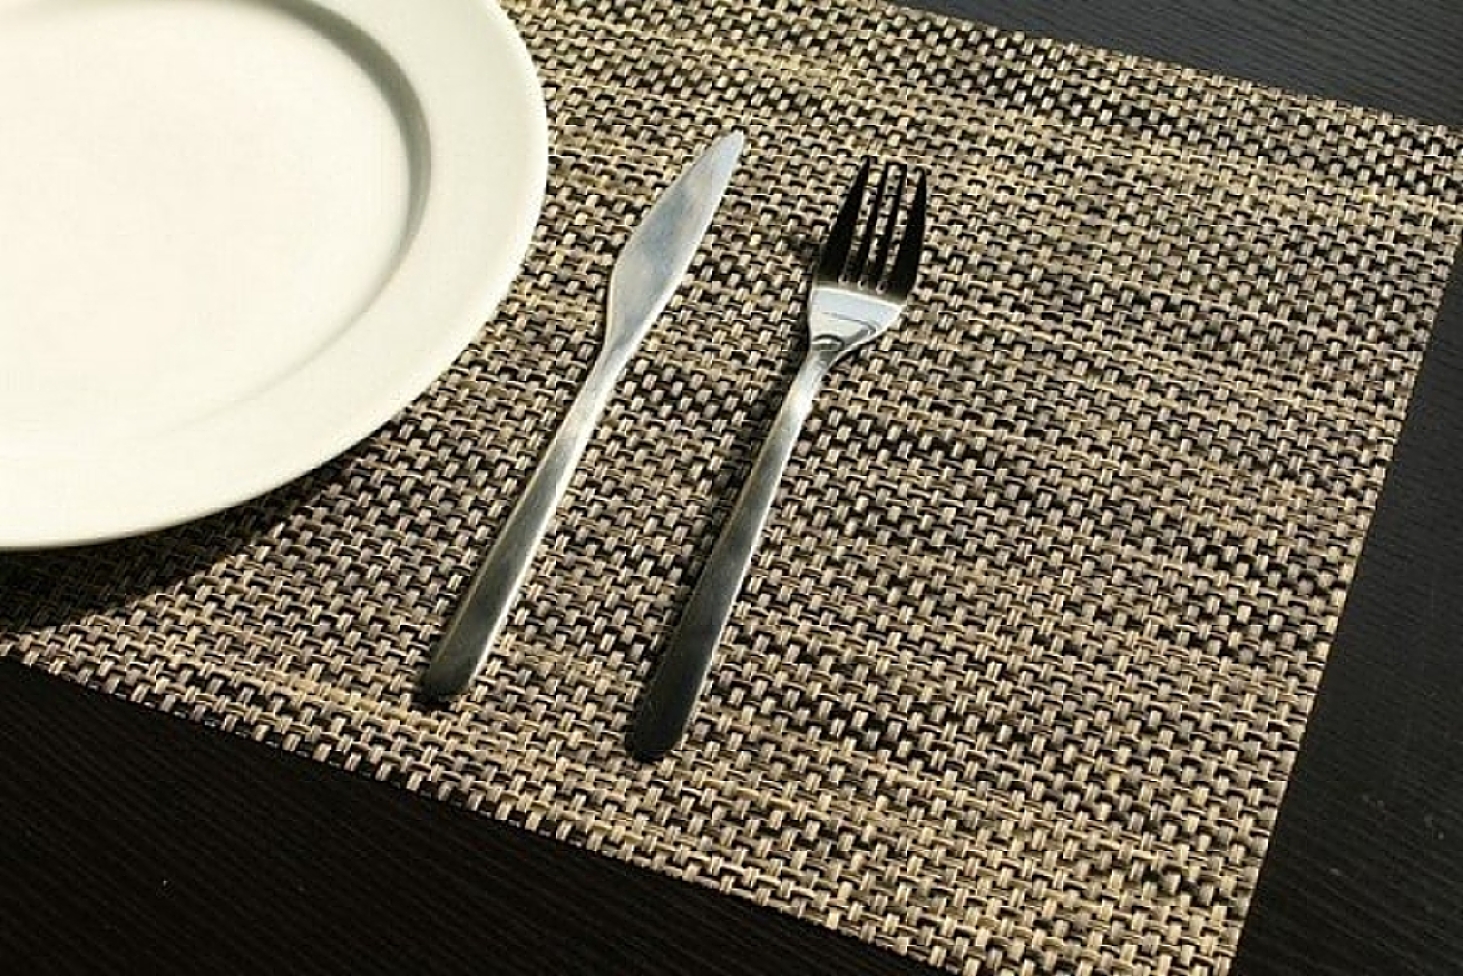 texlymat-woven-vinyl-placemats-tablemats-excellent-for-household-or-restaurant-30cm-x-45cm_opt_opt_opt_opt.jpg